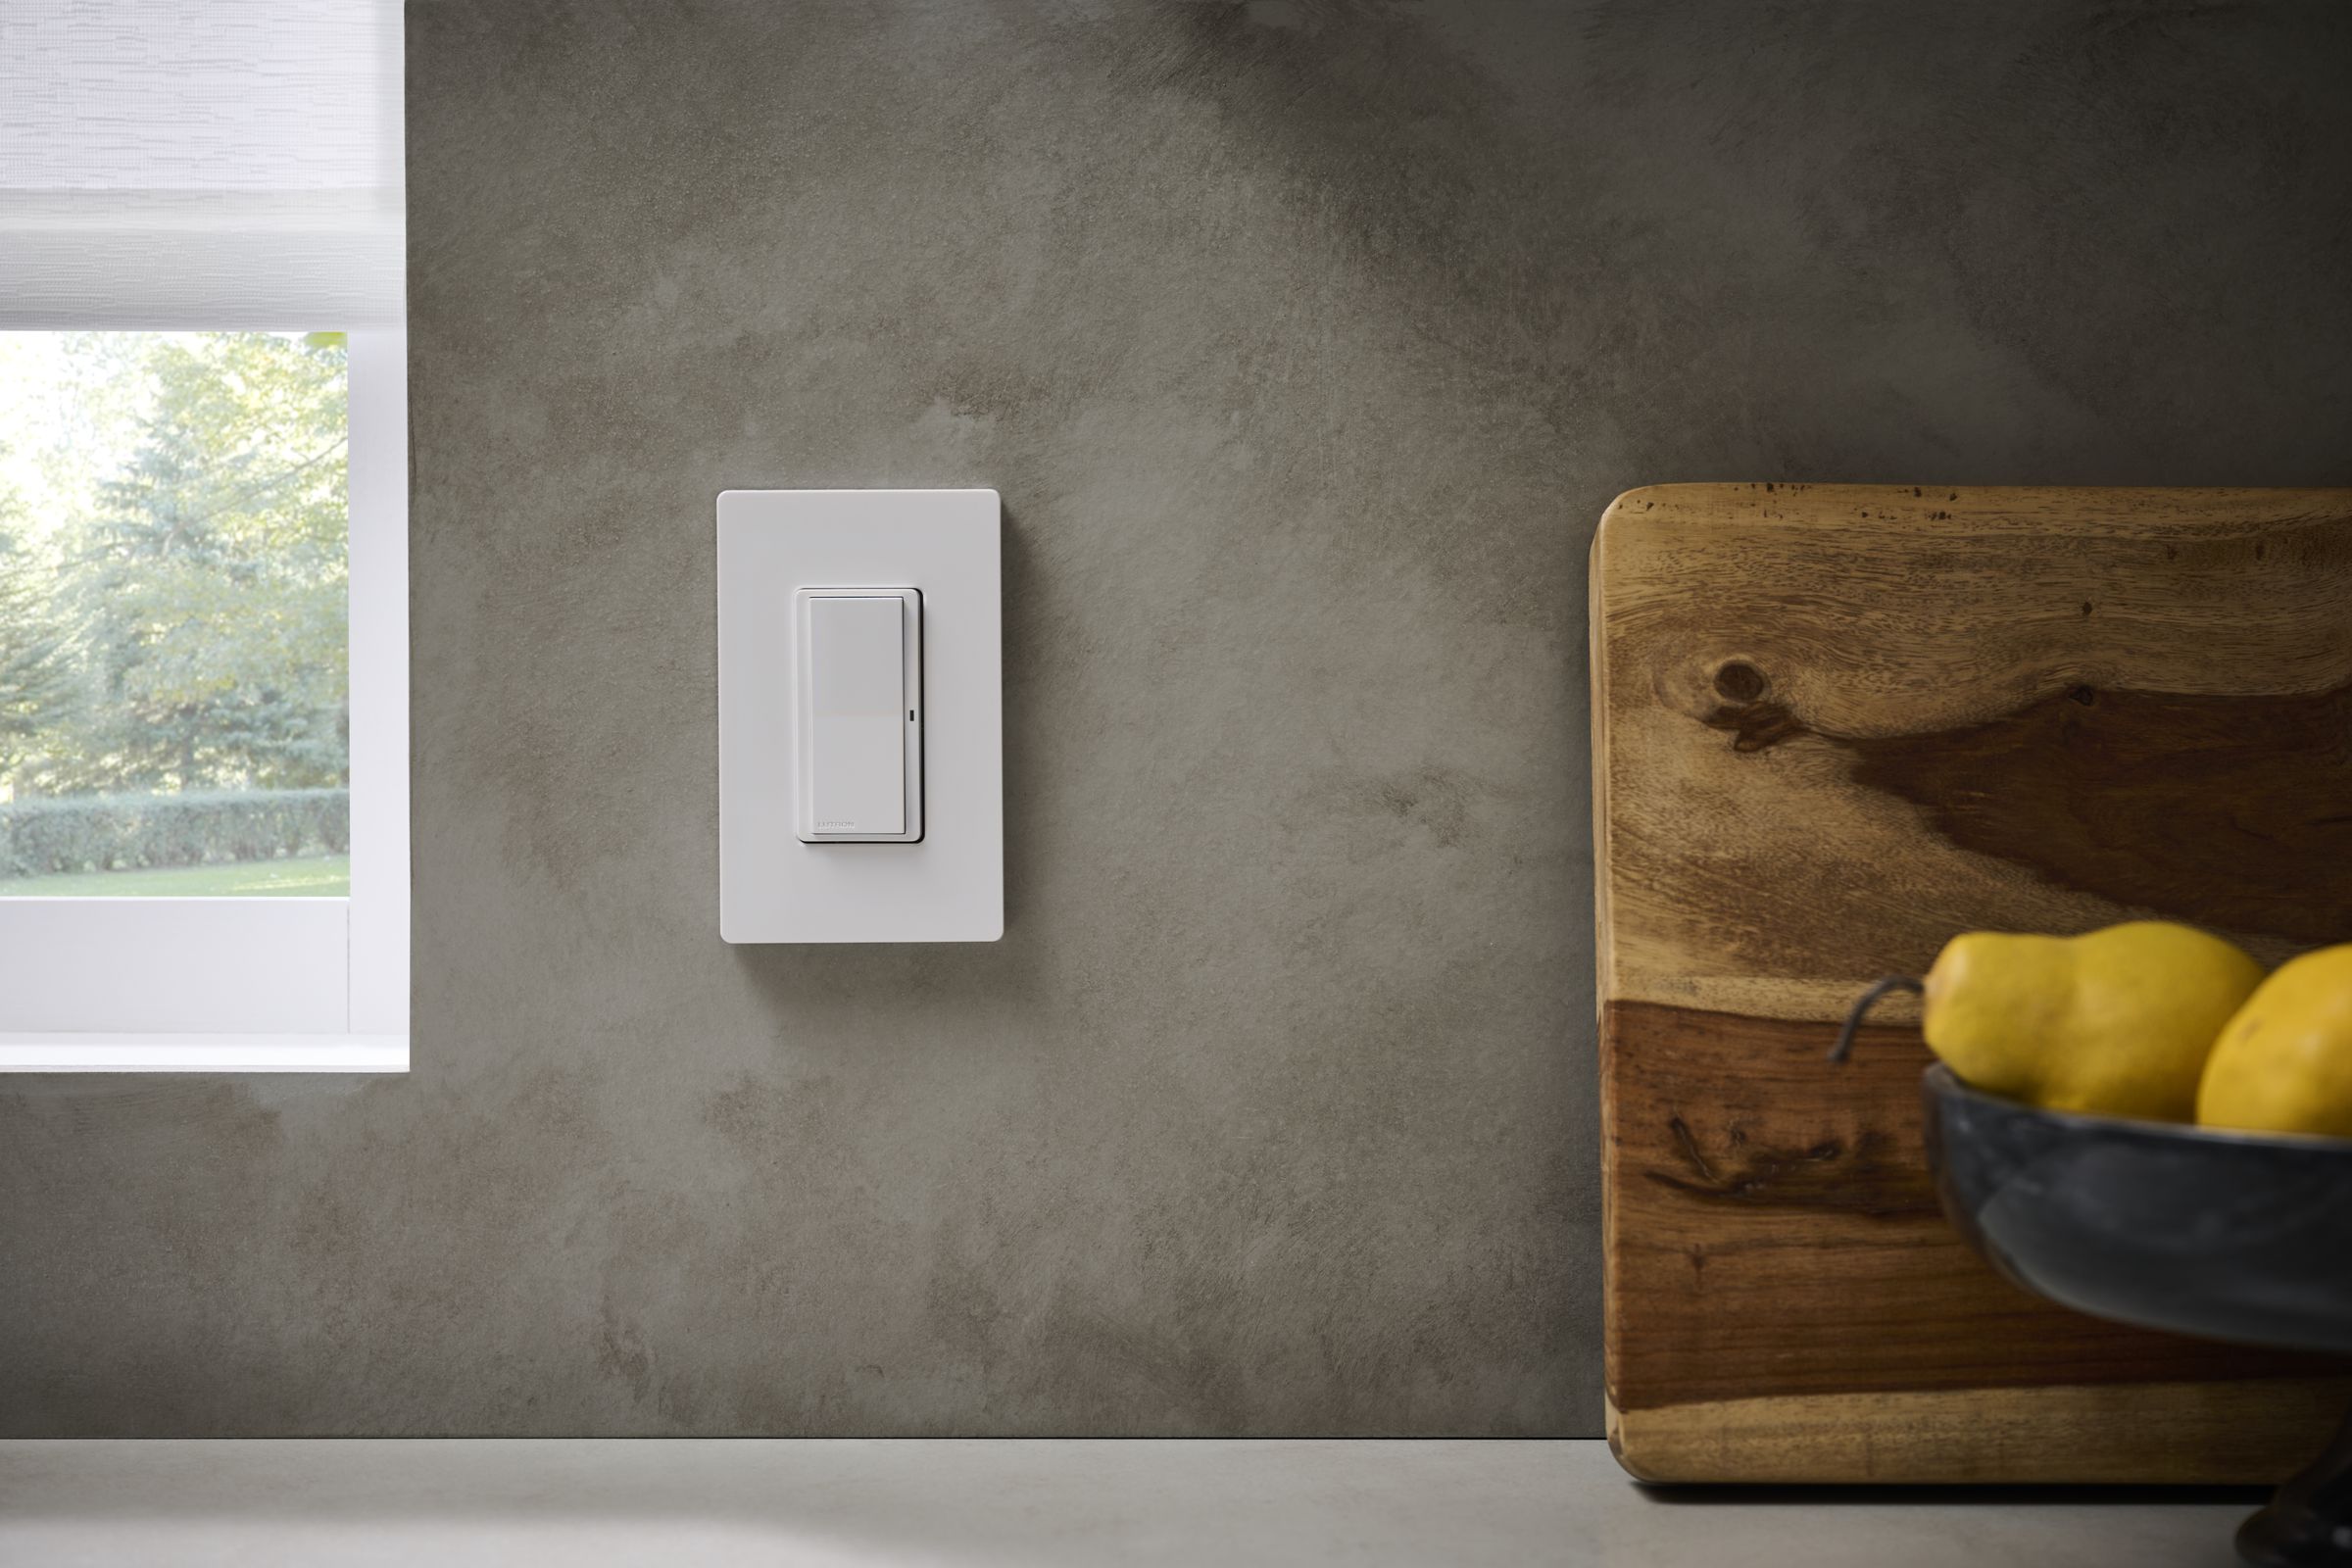 With this redesign of its popular Pico wireless remote, Lutron is transitioning its Caséta smart lighting line to a more classic look.